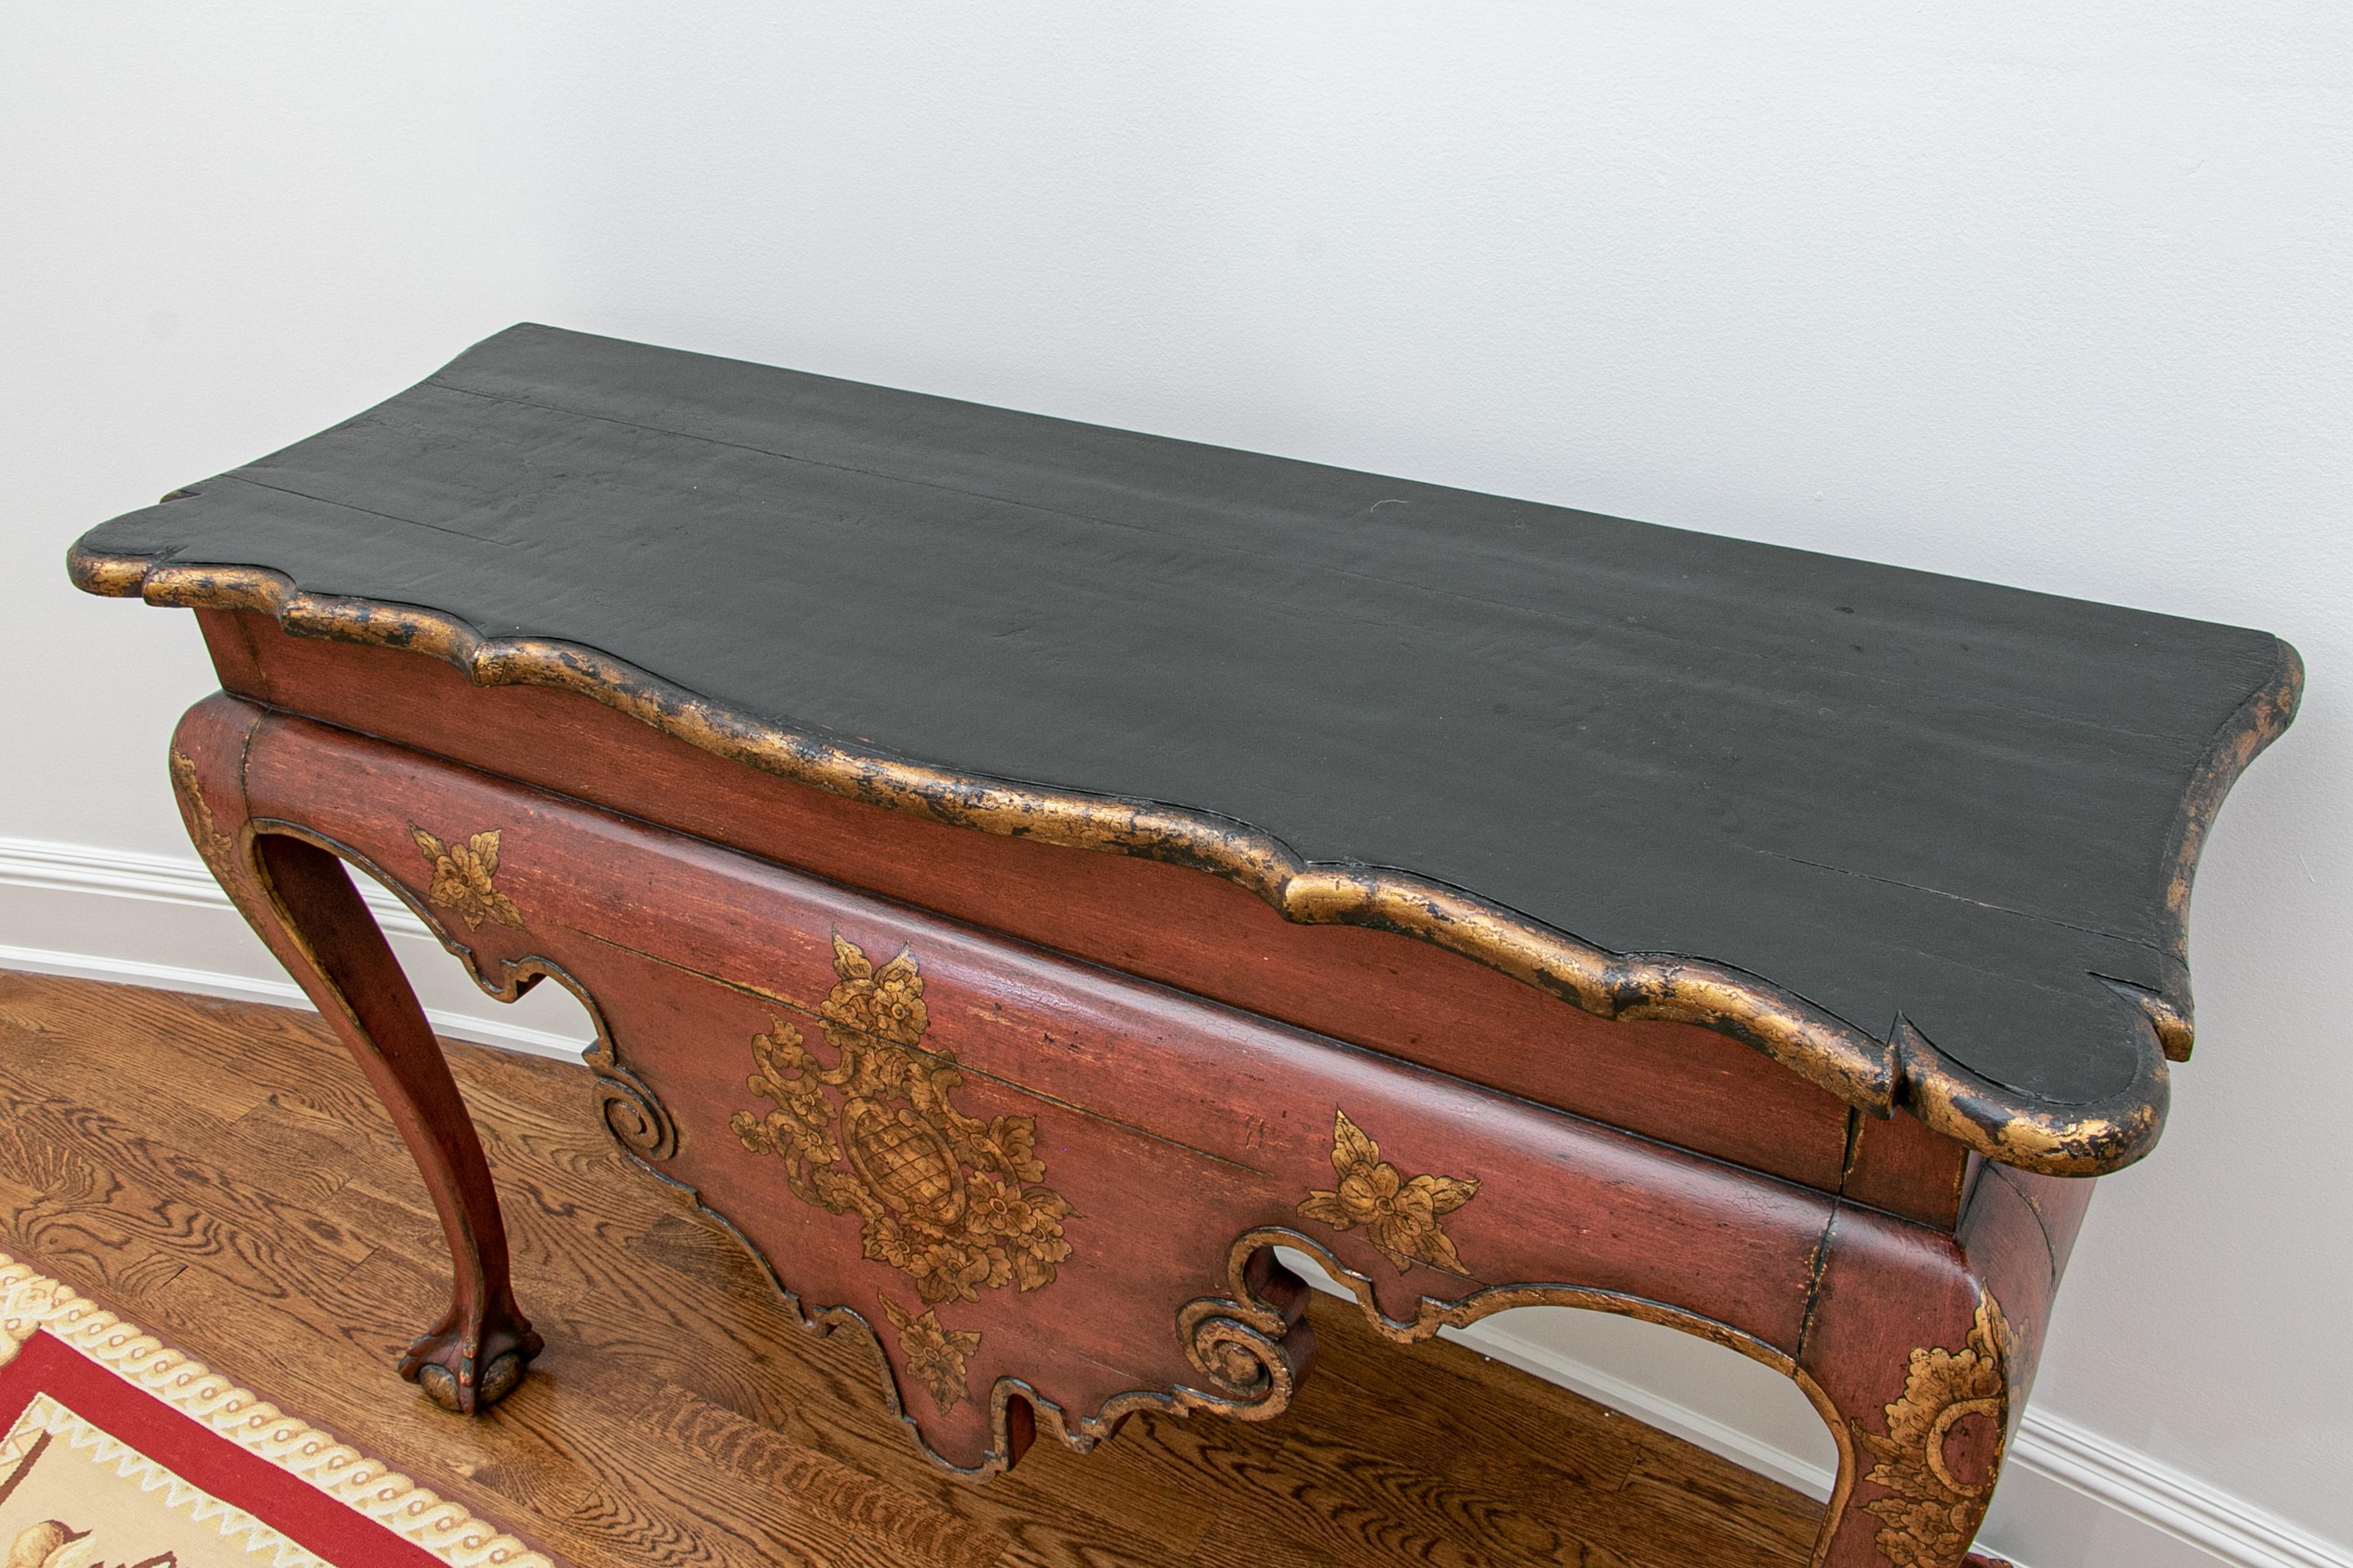 Wood Fine Italianate Carved and Decorated Console Table